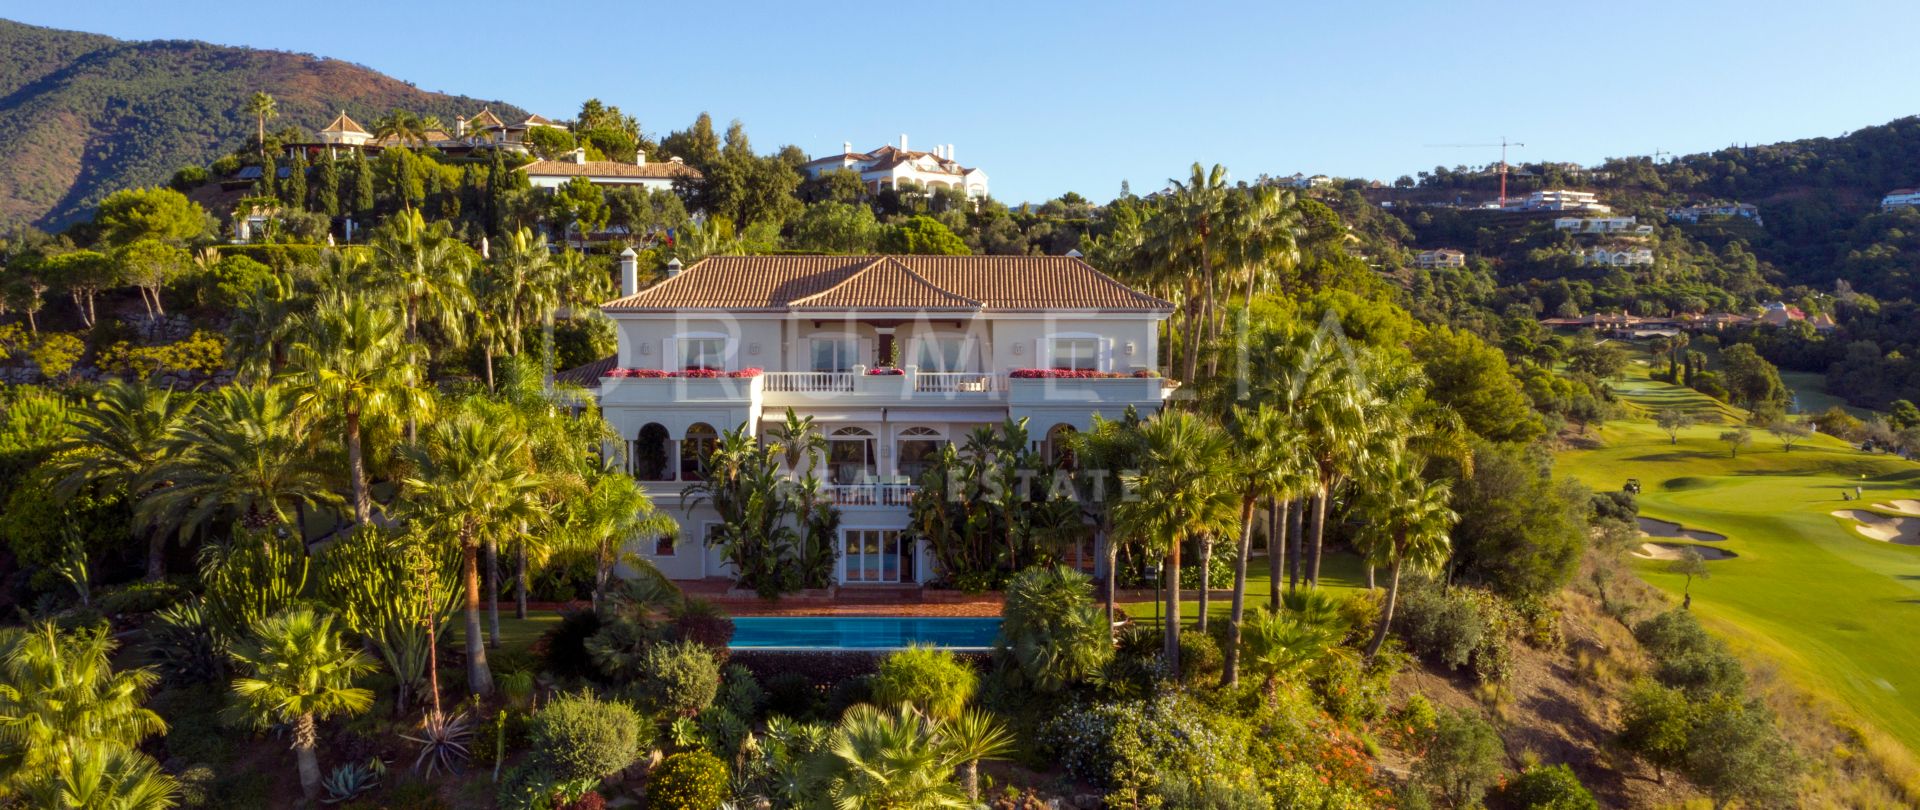 Magnificent classic Andalusian-style mansion with panoramic views in La Zagaleta, Benahavis